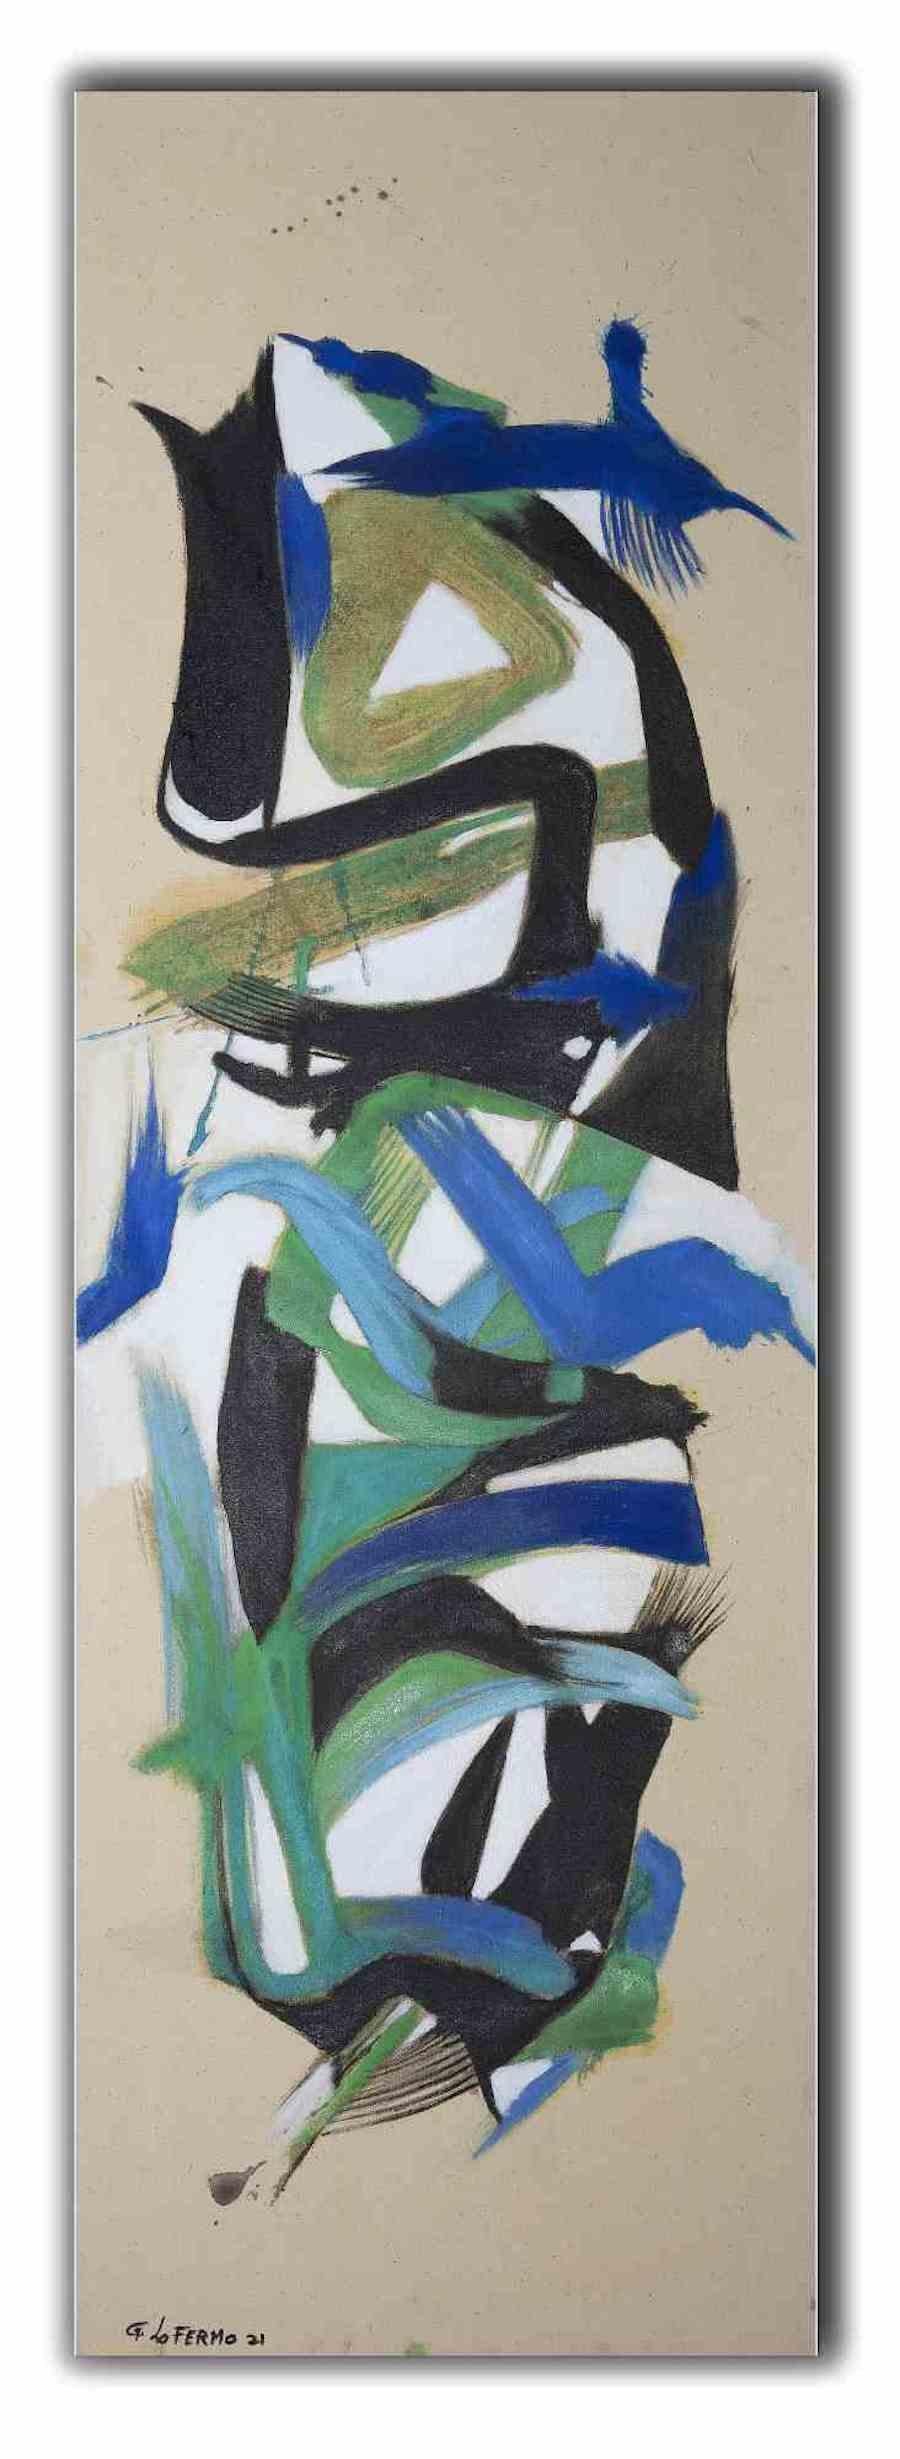 Abstract Expression is an original artwork realized by Giorgio Lo Fermo (b. 1947) in 2021.

Original Oil Painting on Canvas.

Hand-signed, titled and dated on the back of the canvas.

Hand-signed and dated on the lower left corner.

Mint